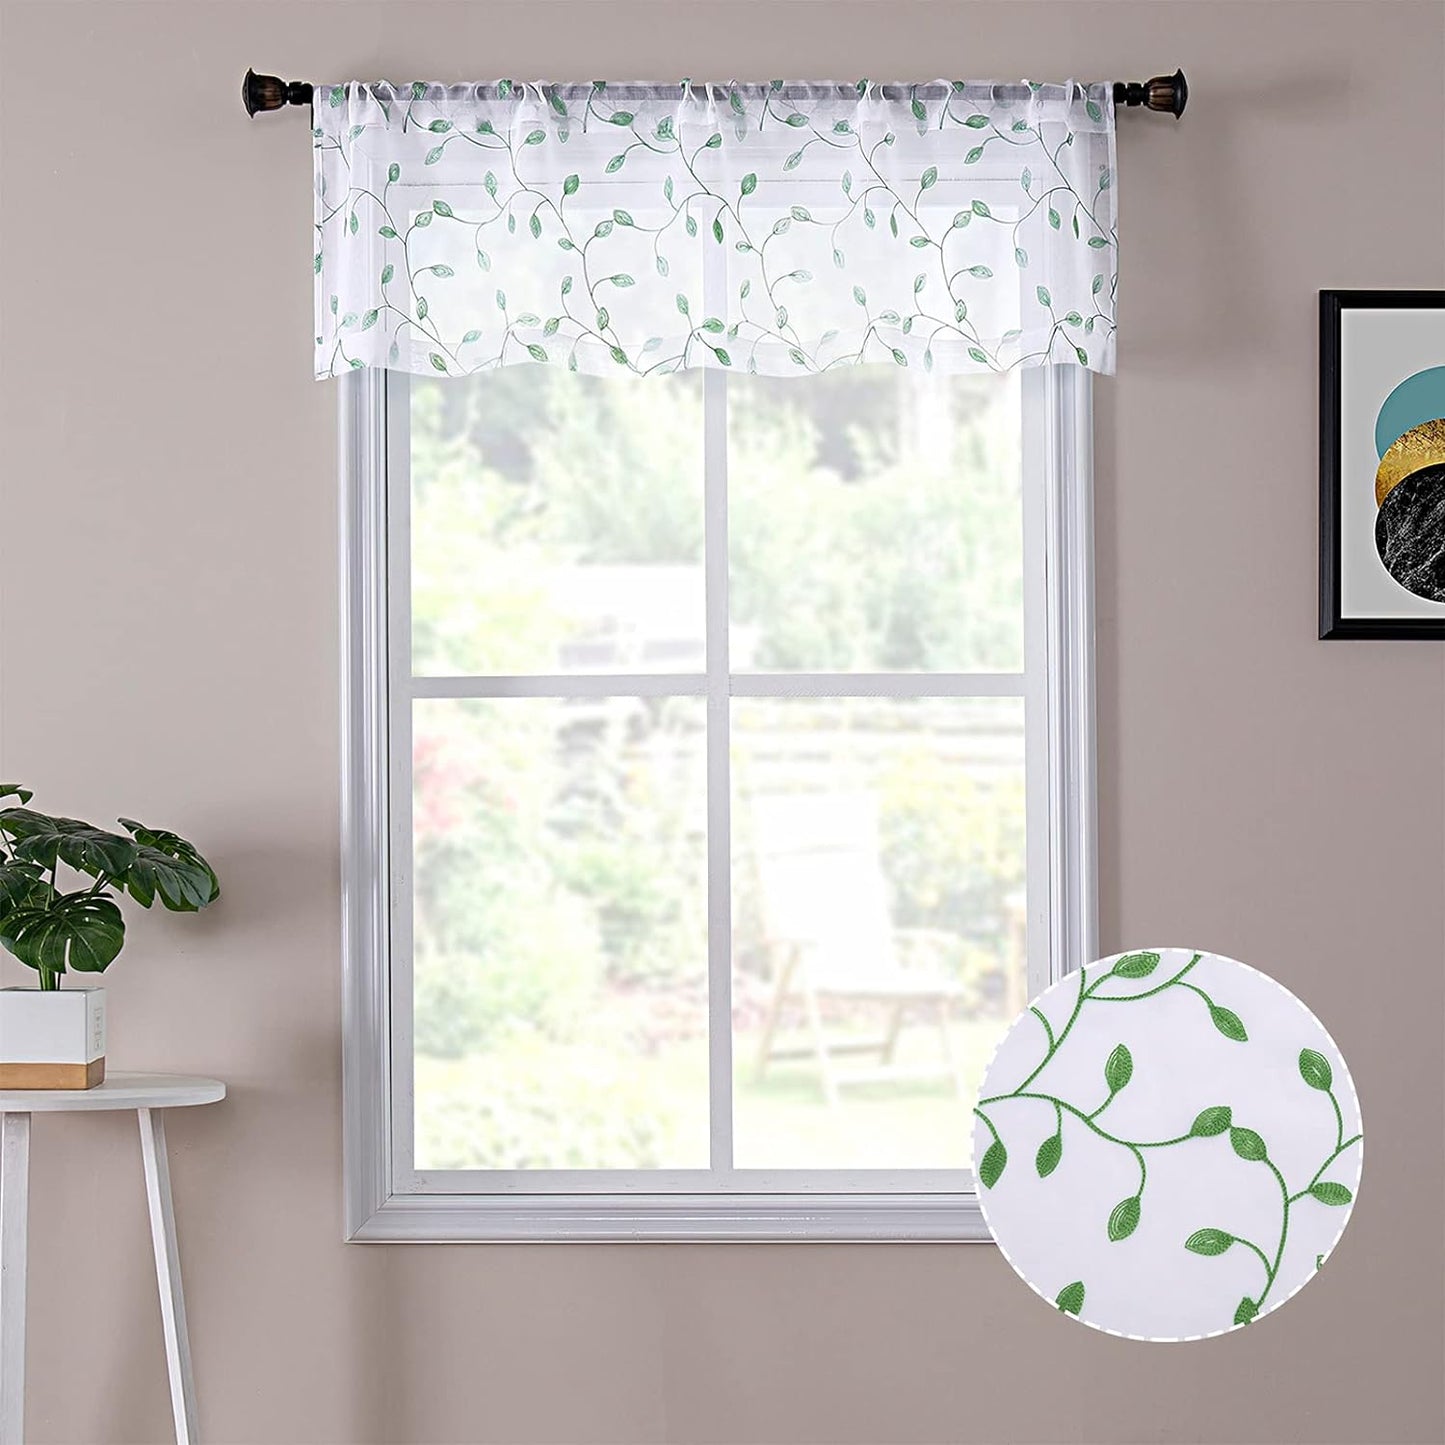 Tollpiz Leaves Sheer Valance Curtains White Leaf Embroidery Bedroom Curtain Rod Pocket Voile Curtains for Living Room, 54 X 16 Inches Long, Set of 1 Panel  Tollpiz Tex Green 54"W X 16"L 